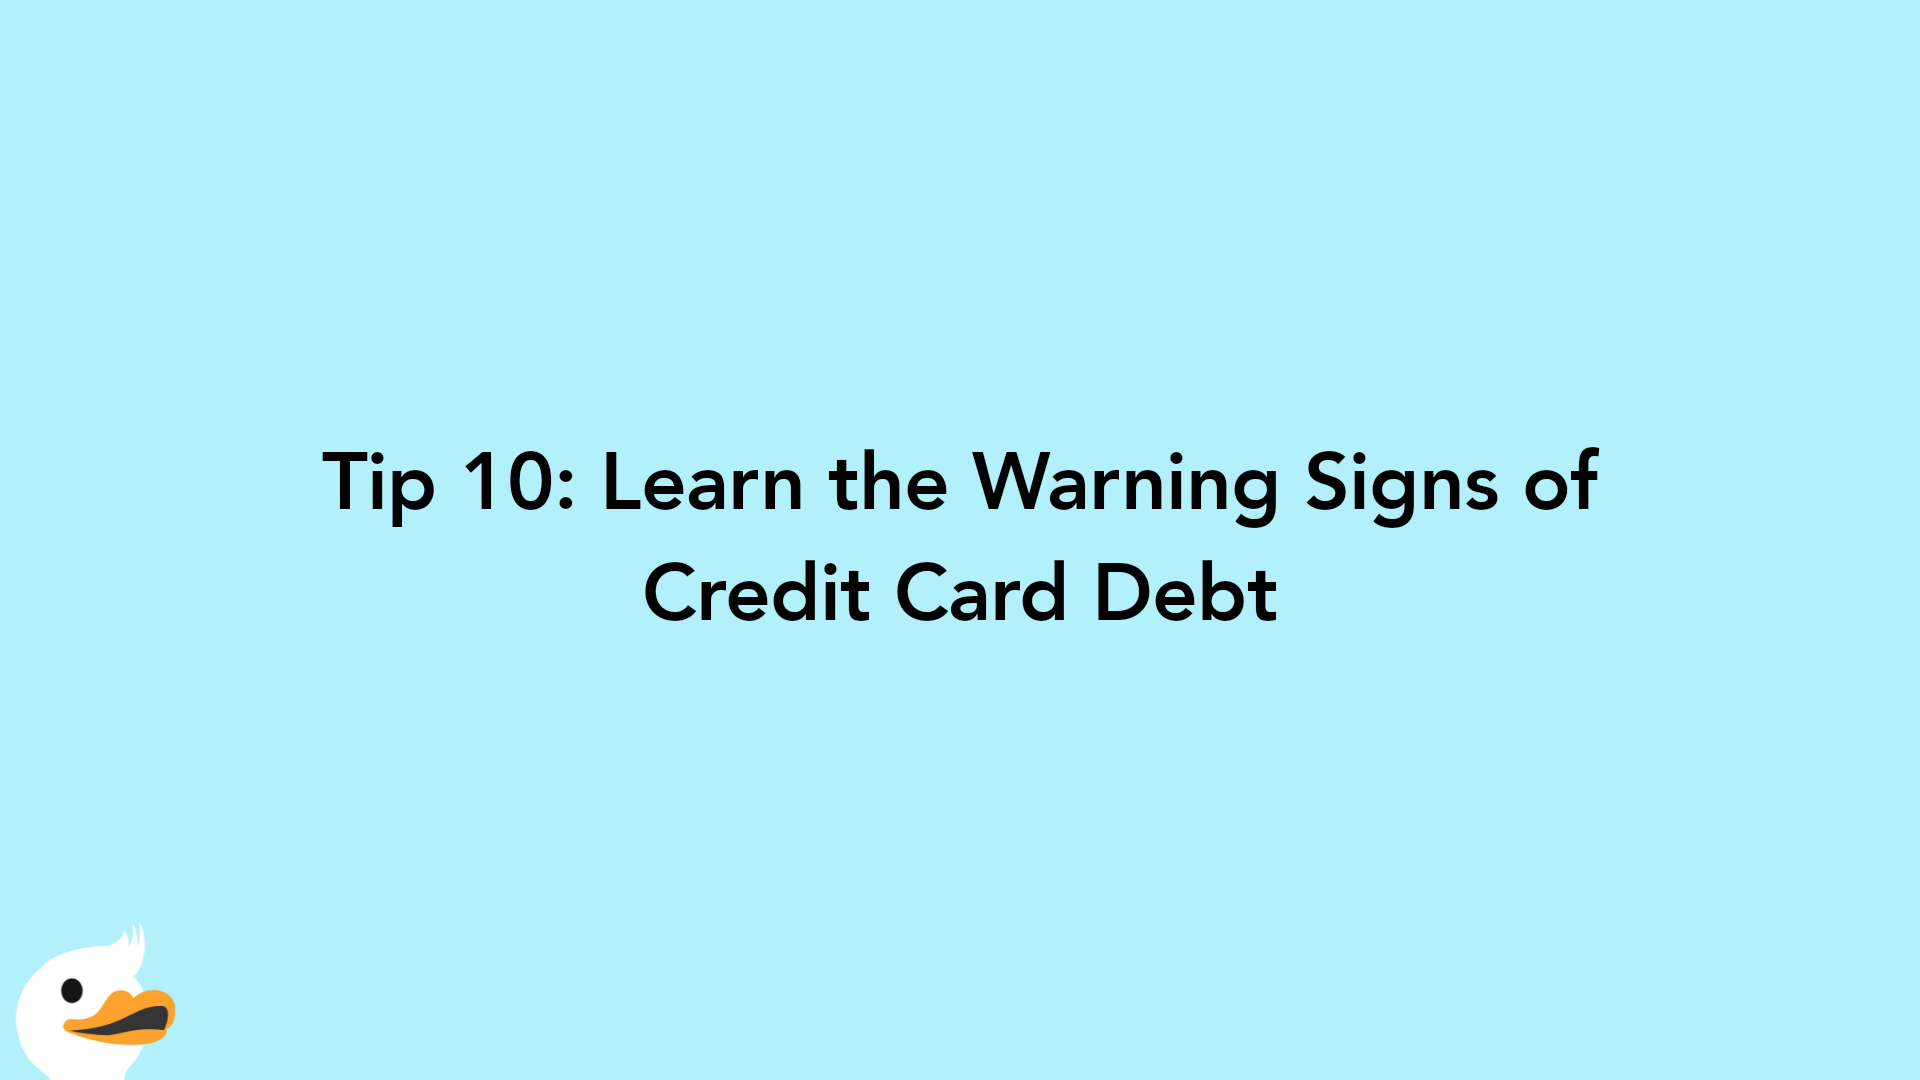 Tip 10: Learn the Warning Signs of Credit Card Debt